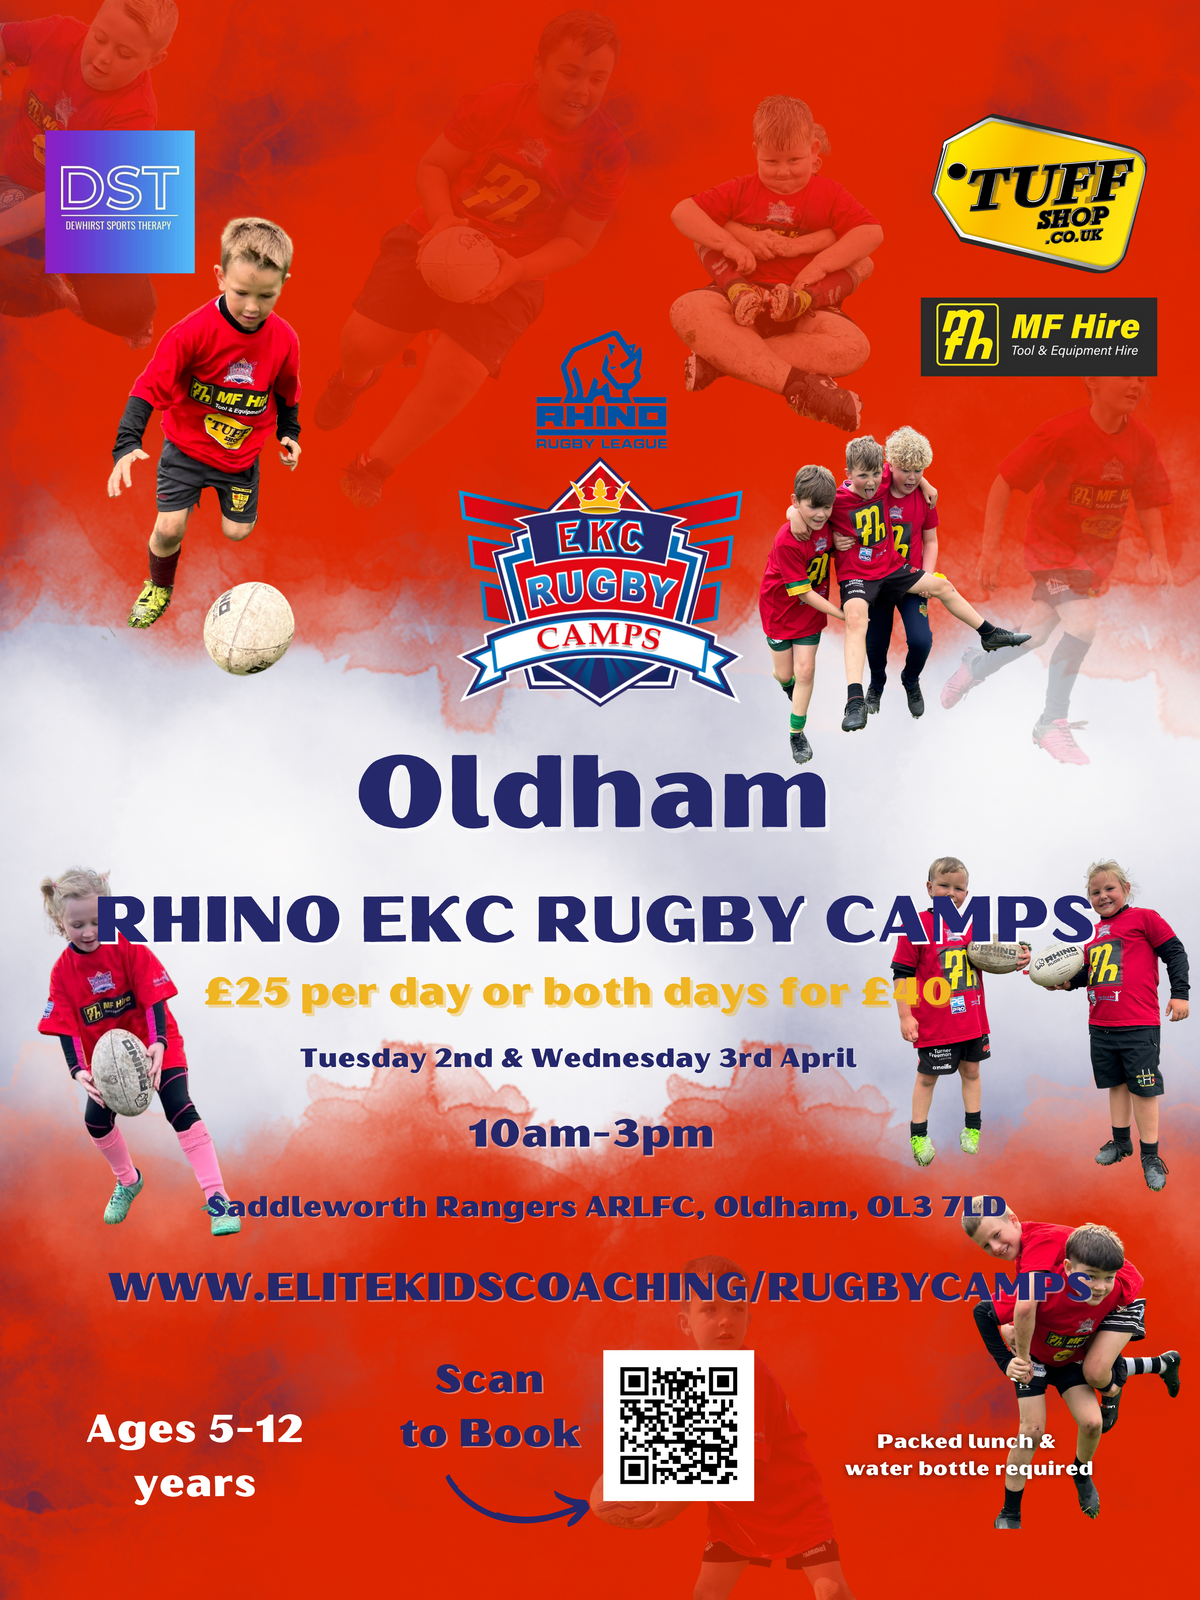 Oldham Rhino EKC Rugby Camp Wednesday 3rd April